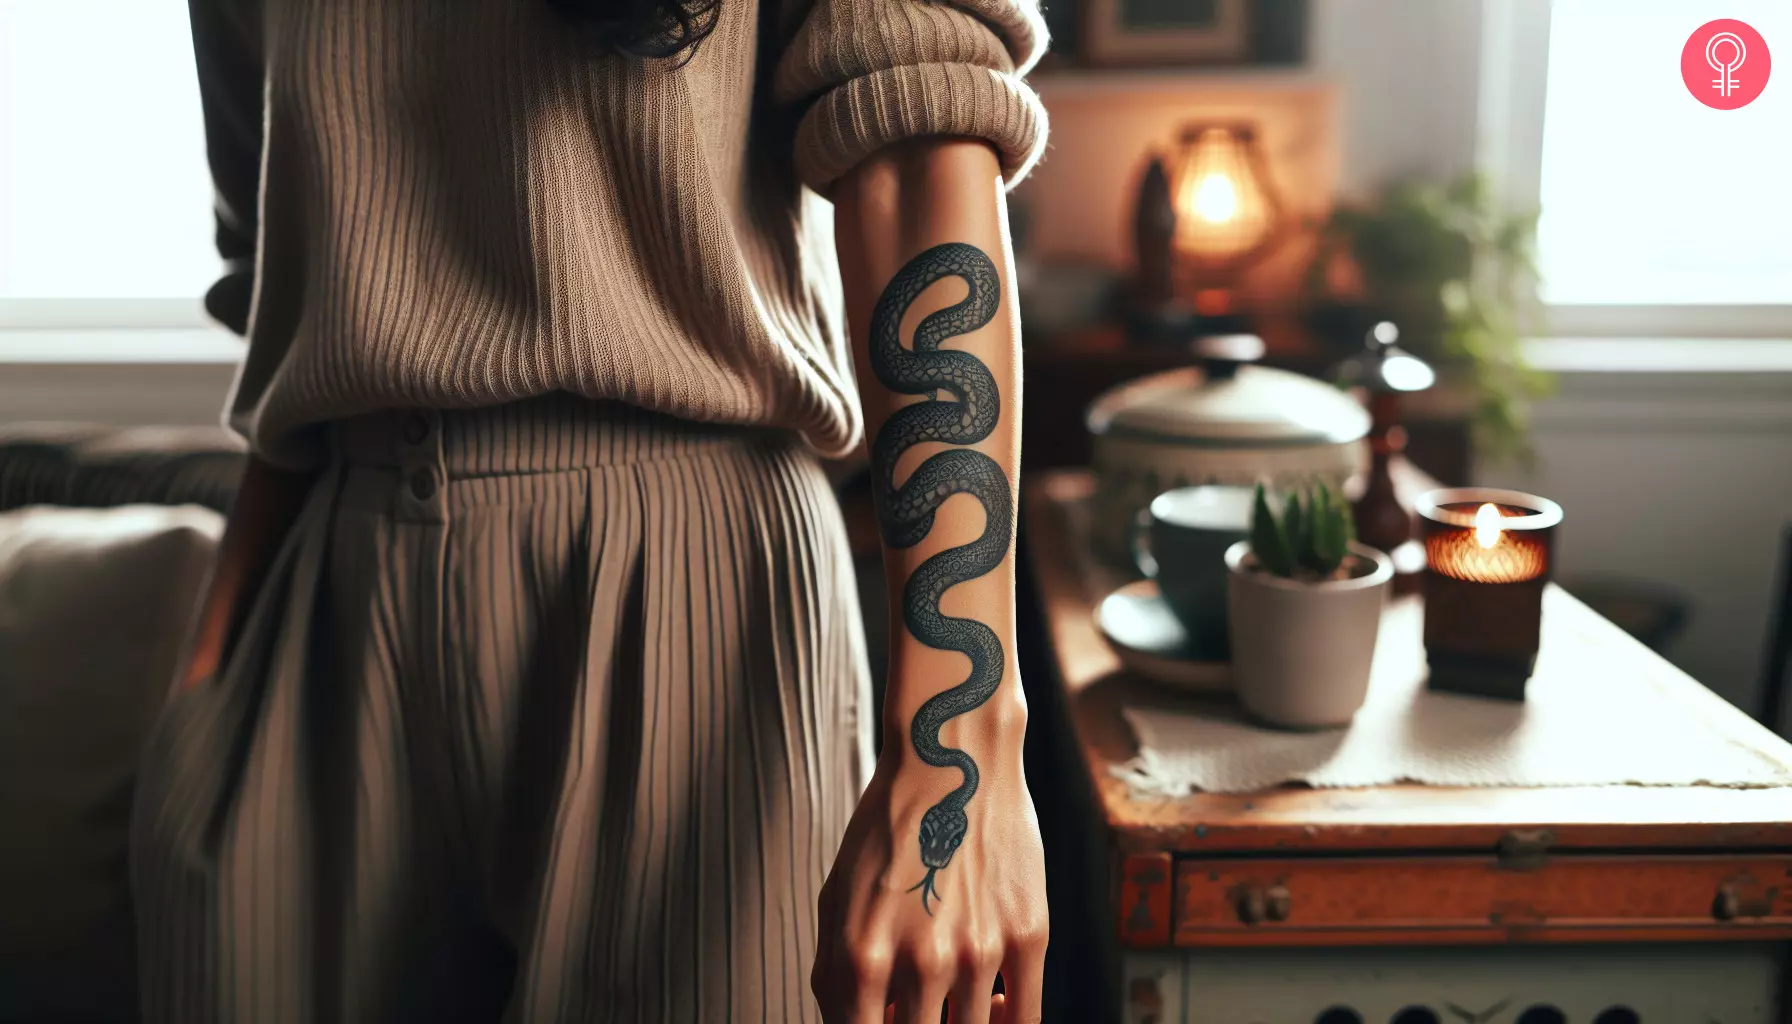 A snake tattoo design on the forearm of a woman